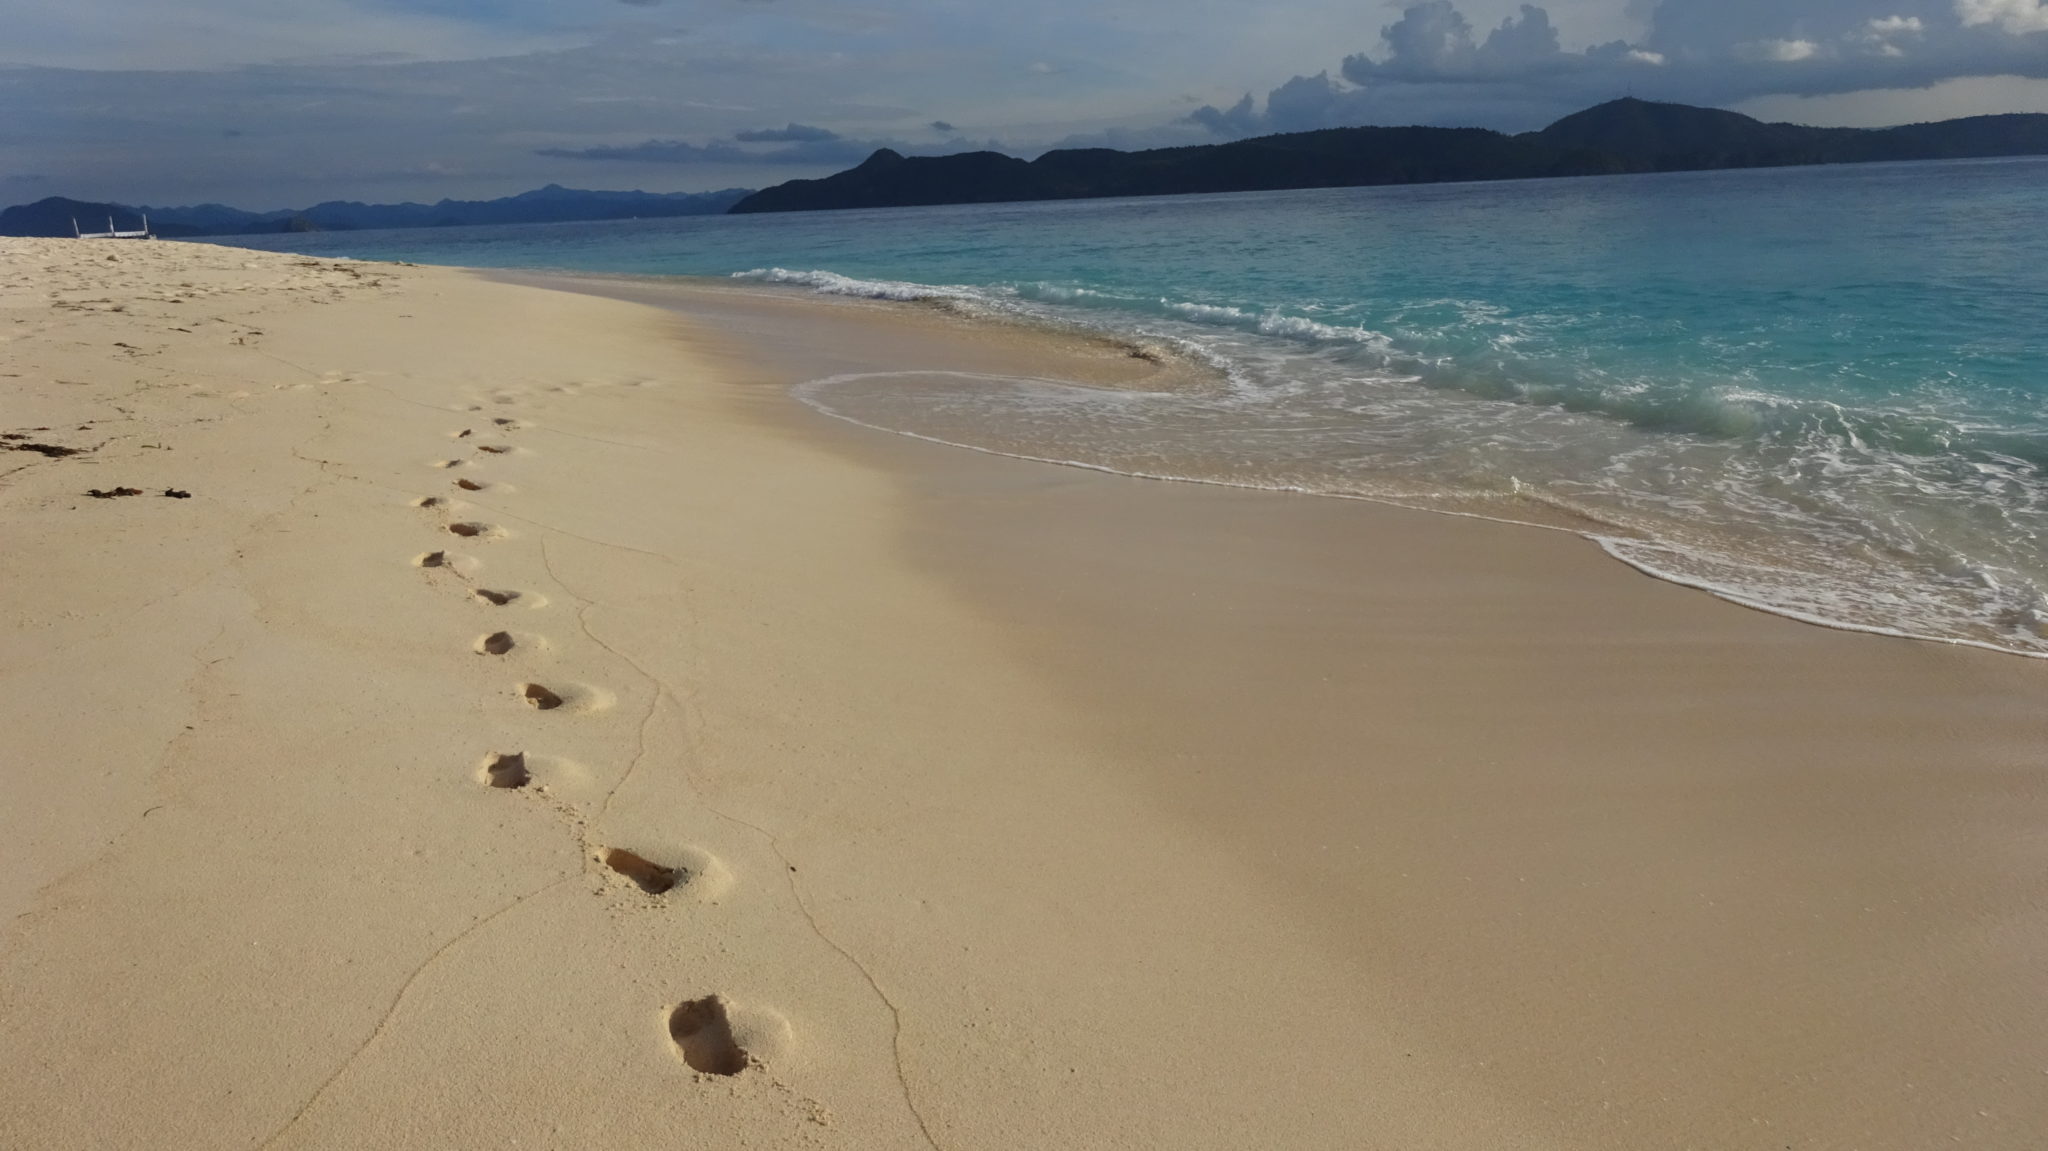 footprints in the sandy beach next to the blue South China Sea